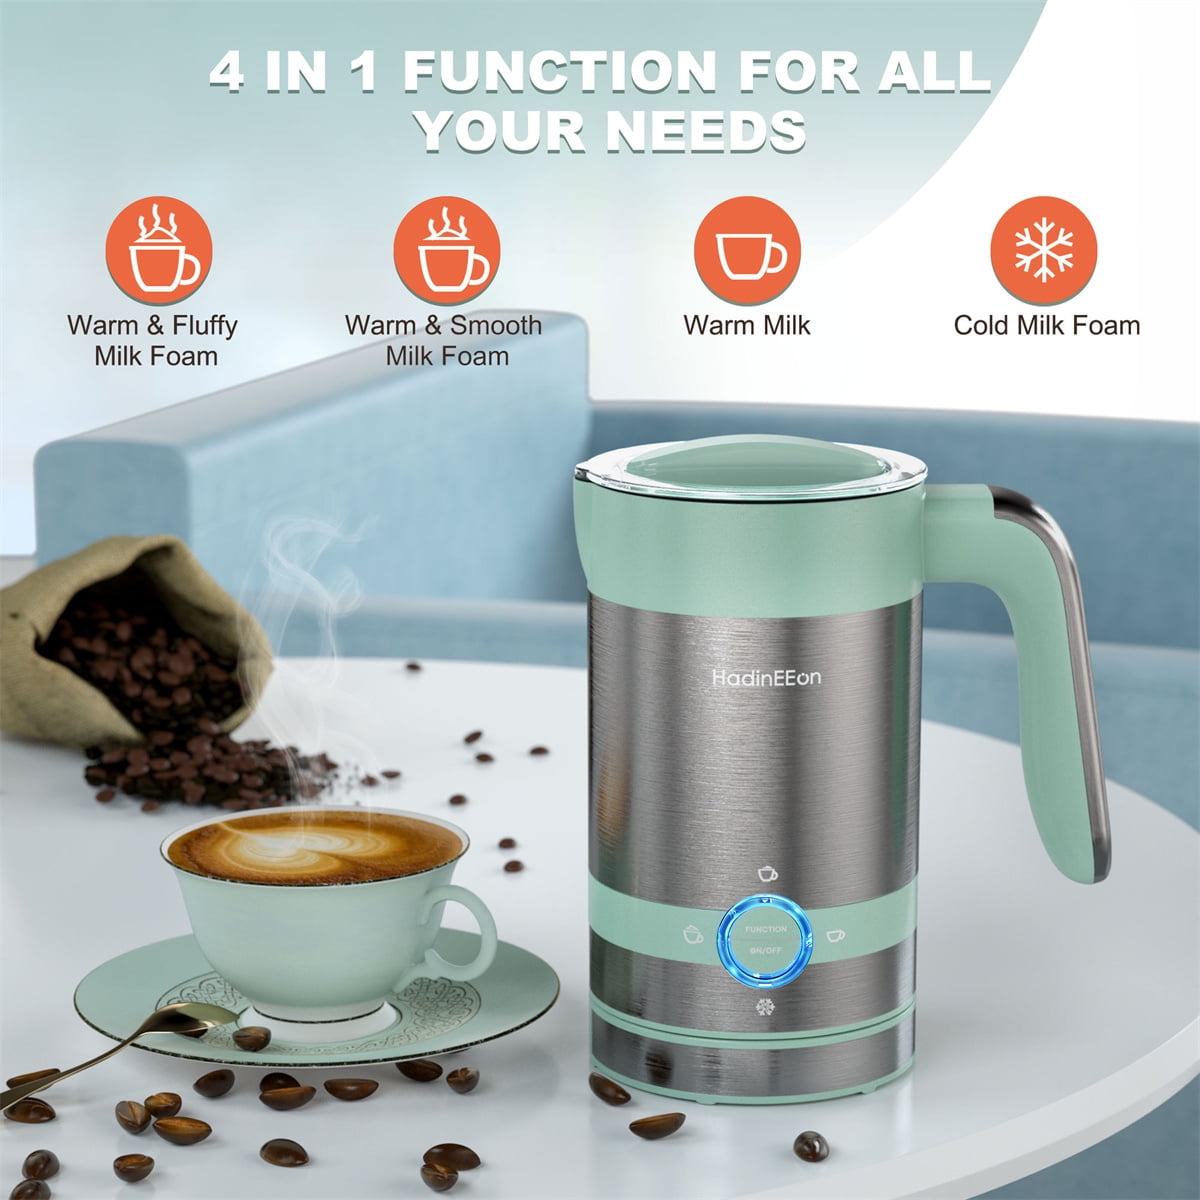 HadinEEon Milk Frother Electric Steamer for Keurig Nespresso